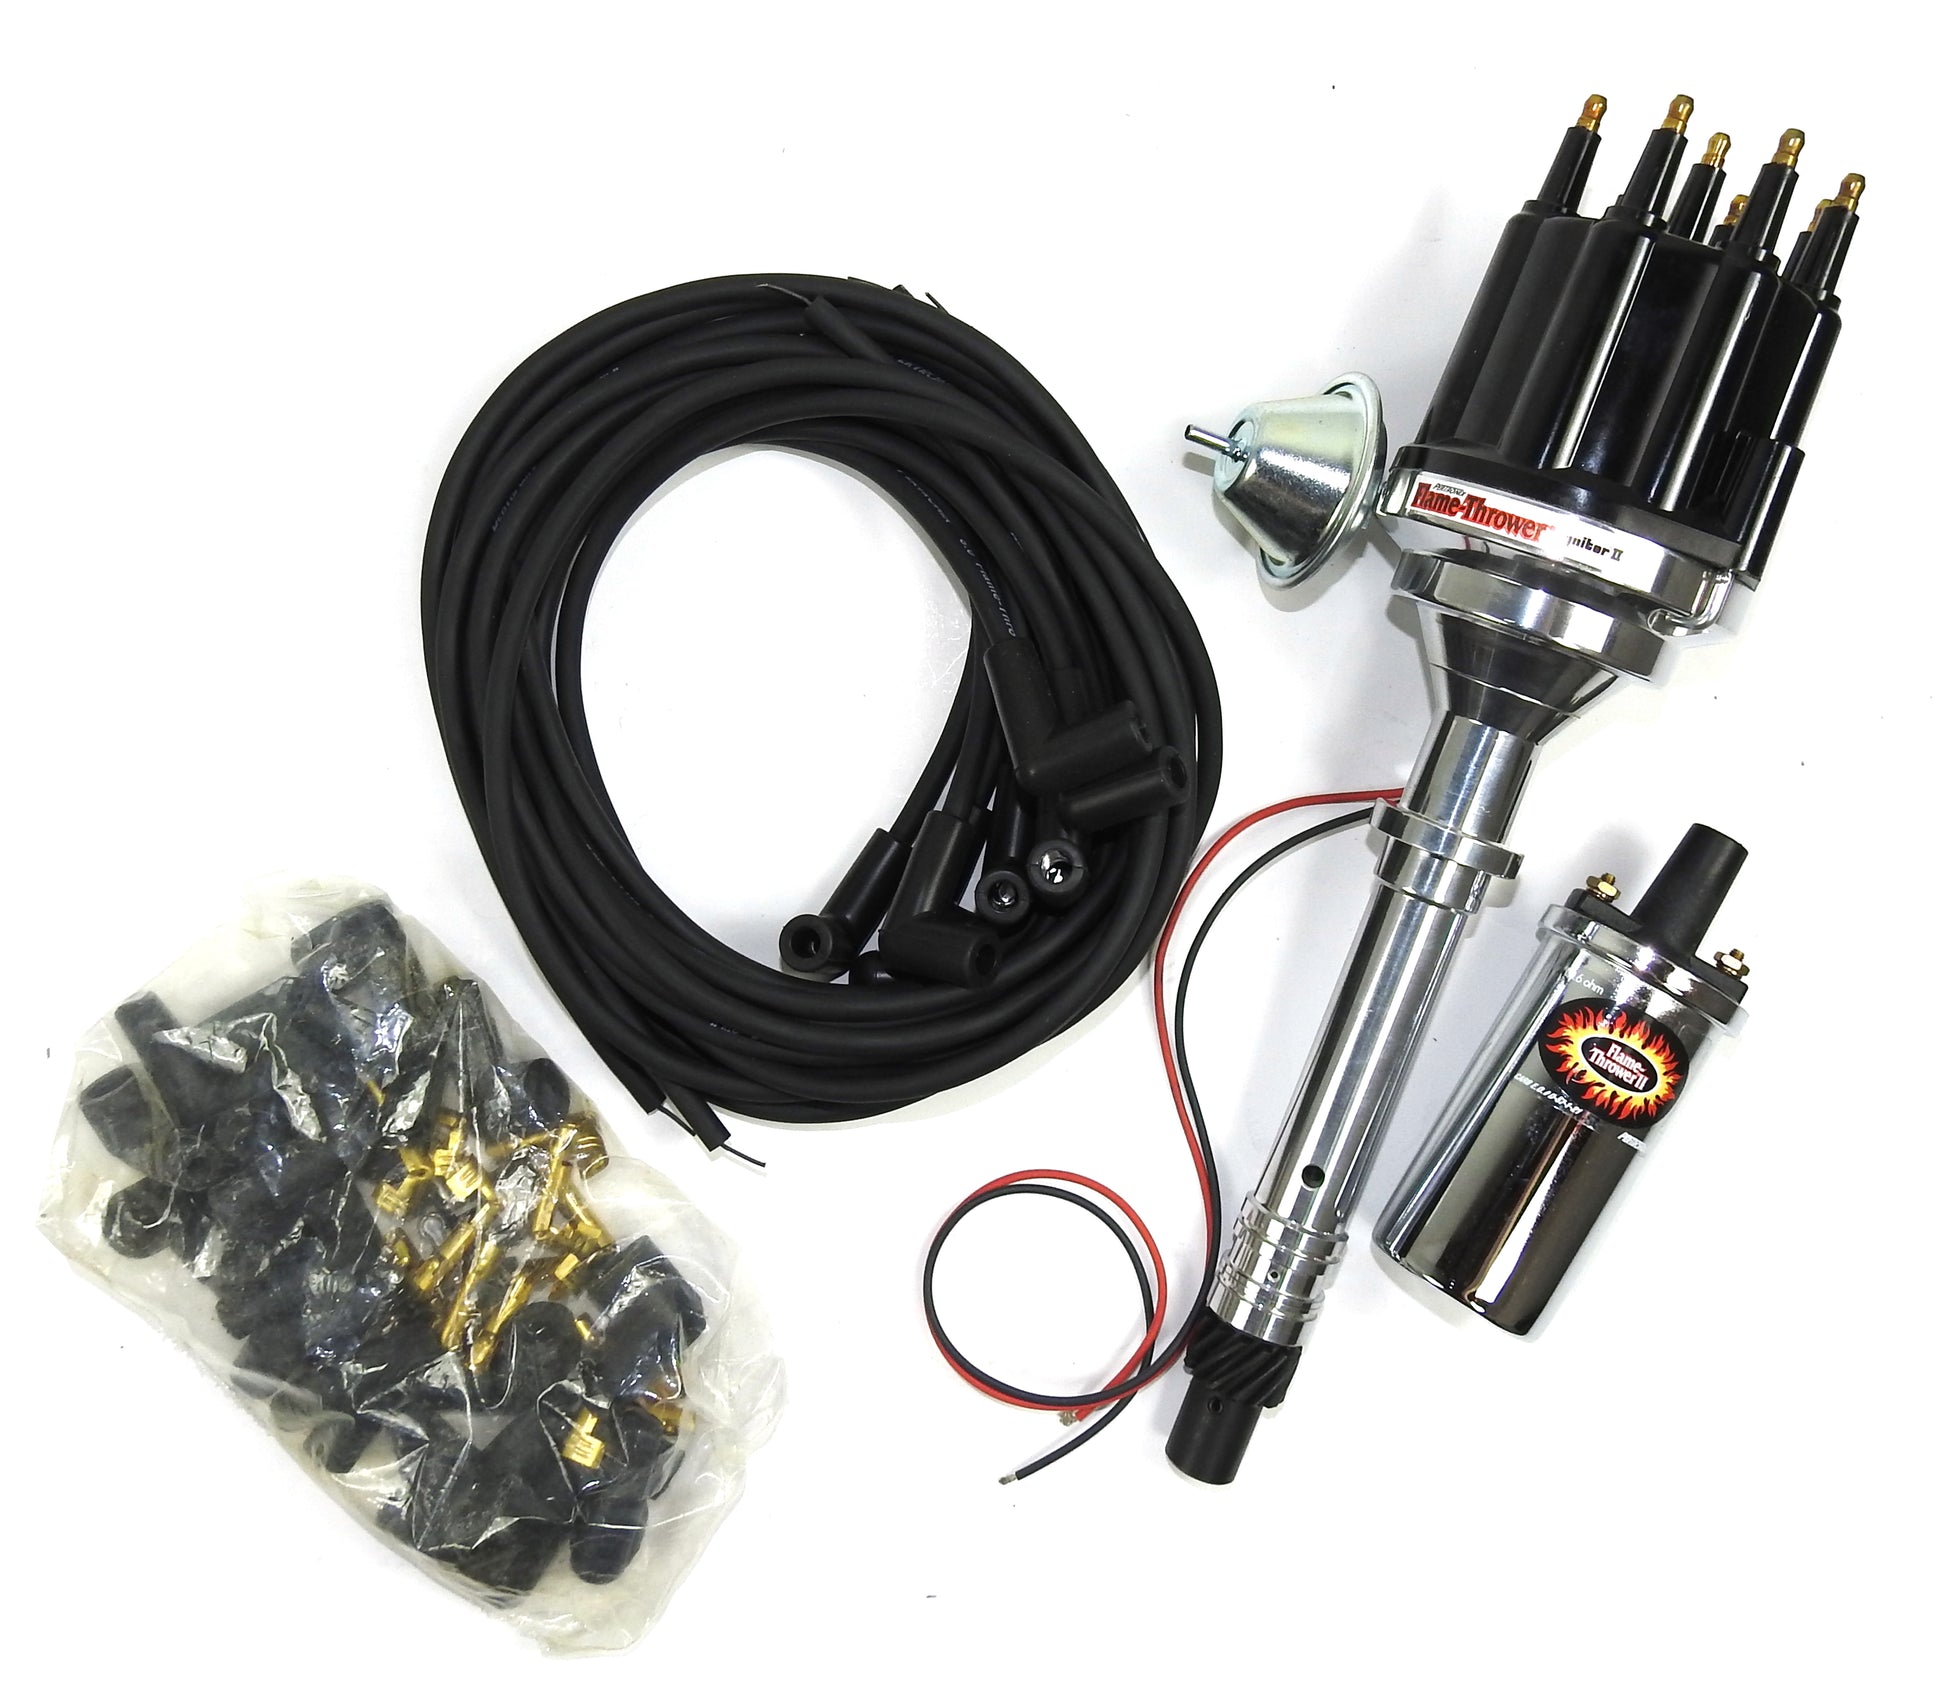 Pertronix Bundle010 Ignition Kit includes Chevy SB/BB Billet Plug n Play Distributor with Black Male Cap, Flame-Thrower II Chrome Coil, Flame-Thrower MAGx2 Universal Black Spark Plug Wires with 90 degree plug boot ends